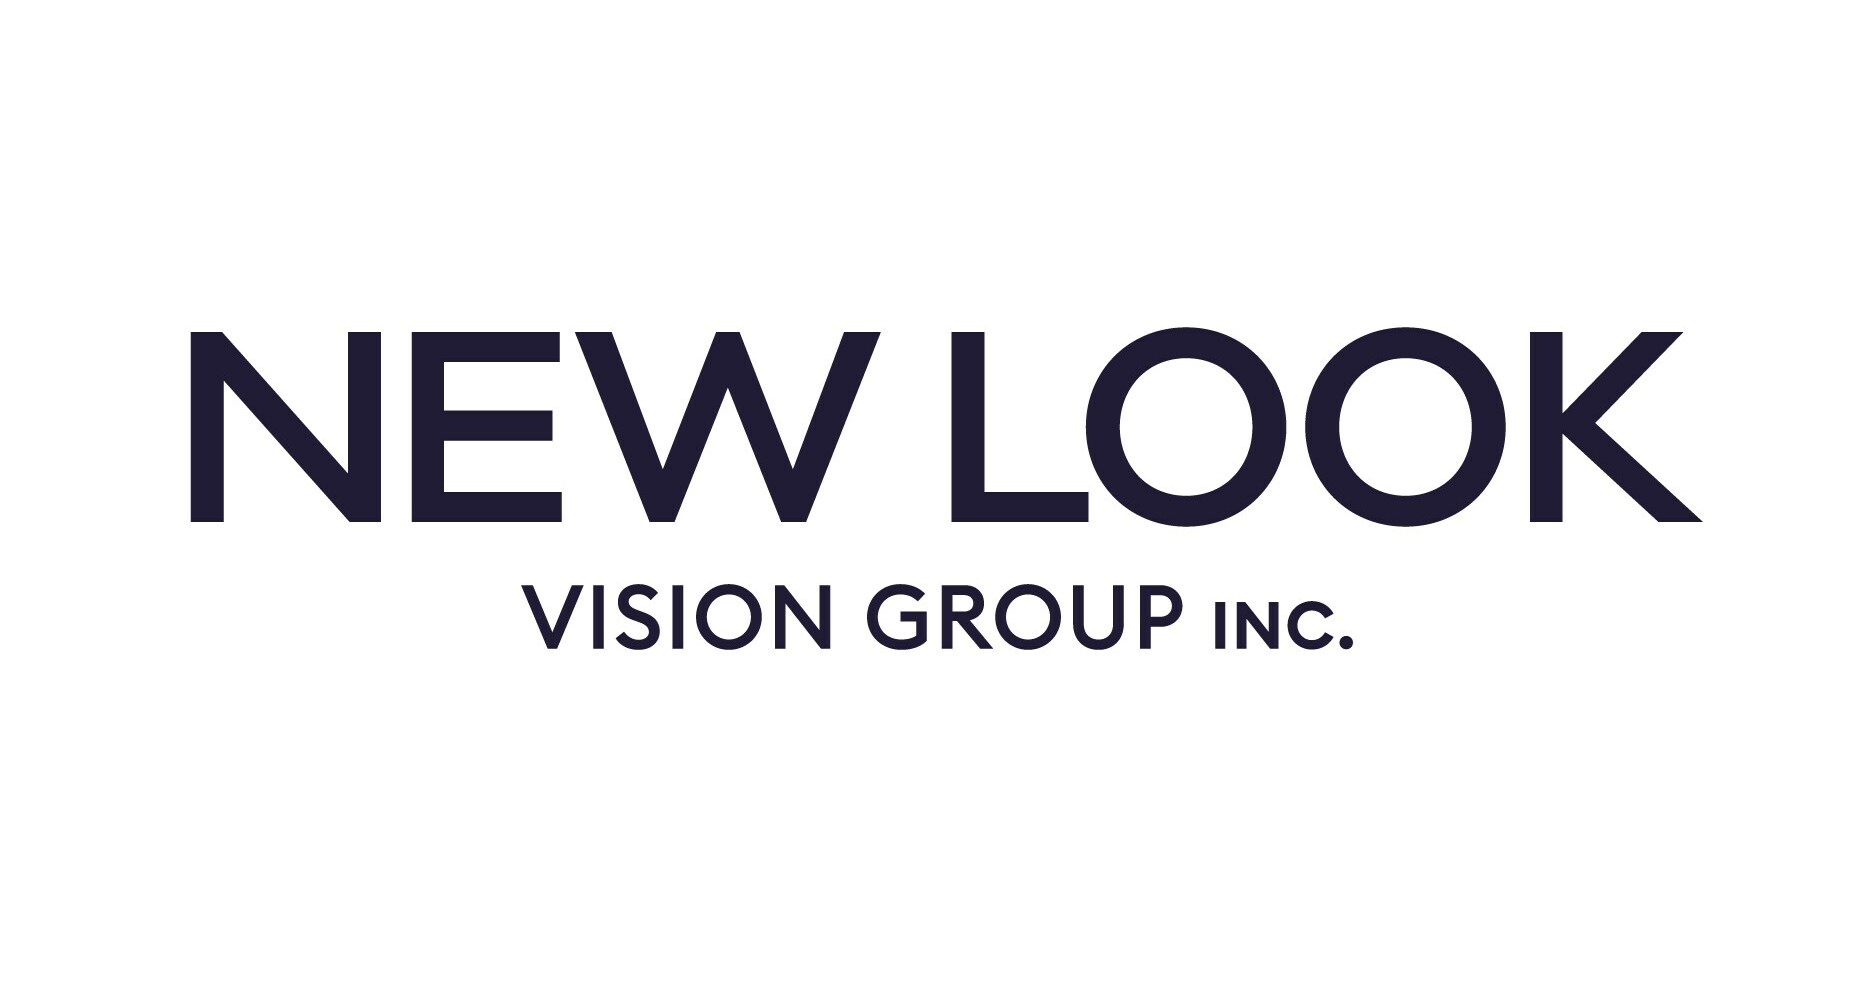 NEW LOOK VISION GROUP NAMED ONE OF CANADA'S BEST MANAGED COMPANIES FOR  SECOND YEAR IN A ROW